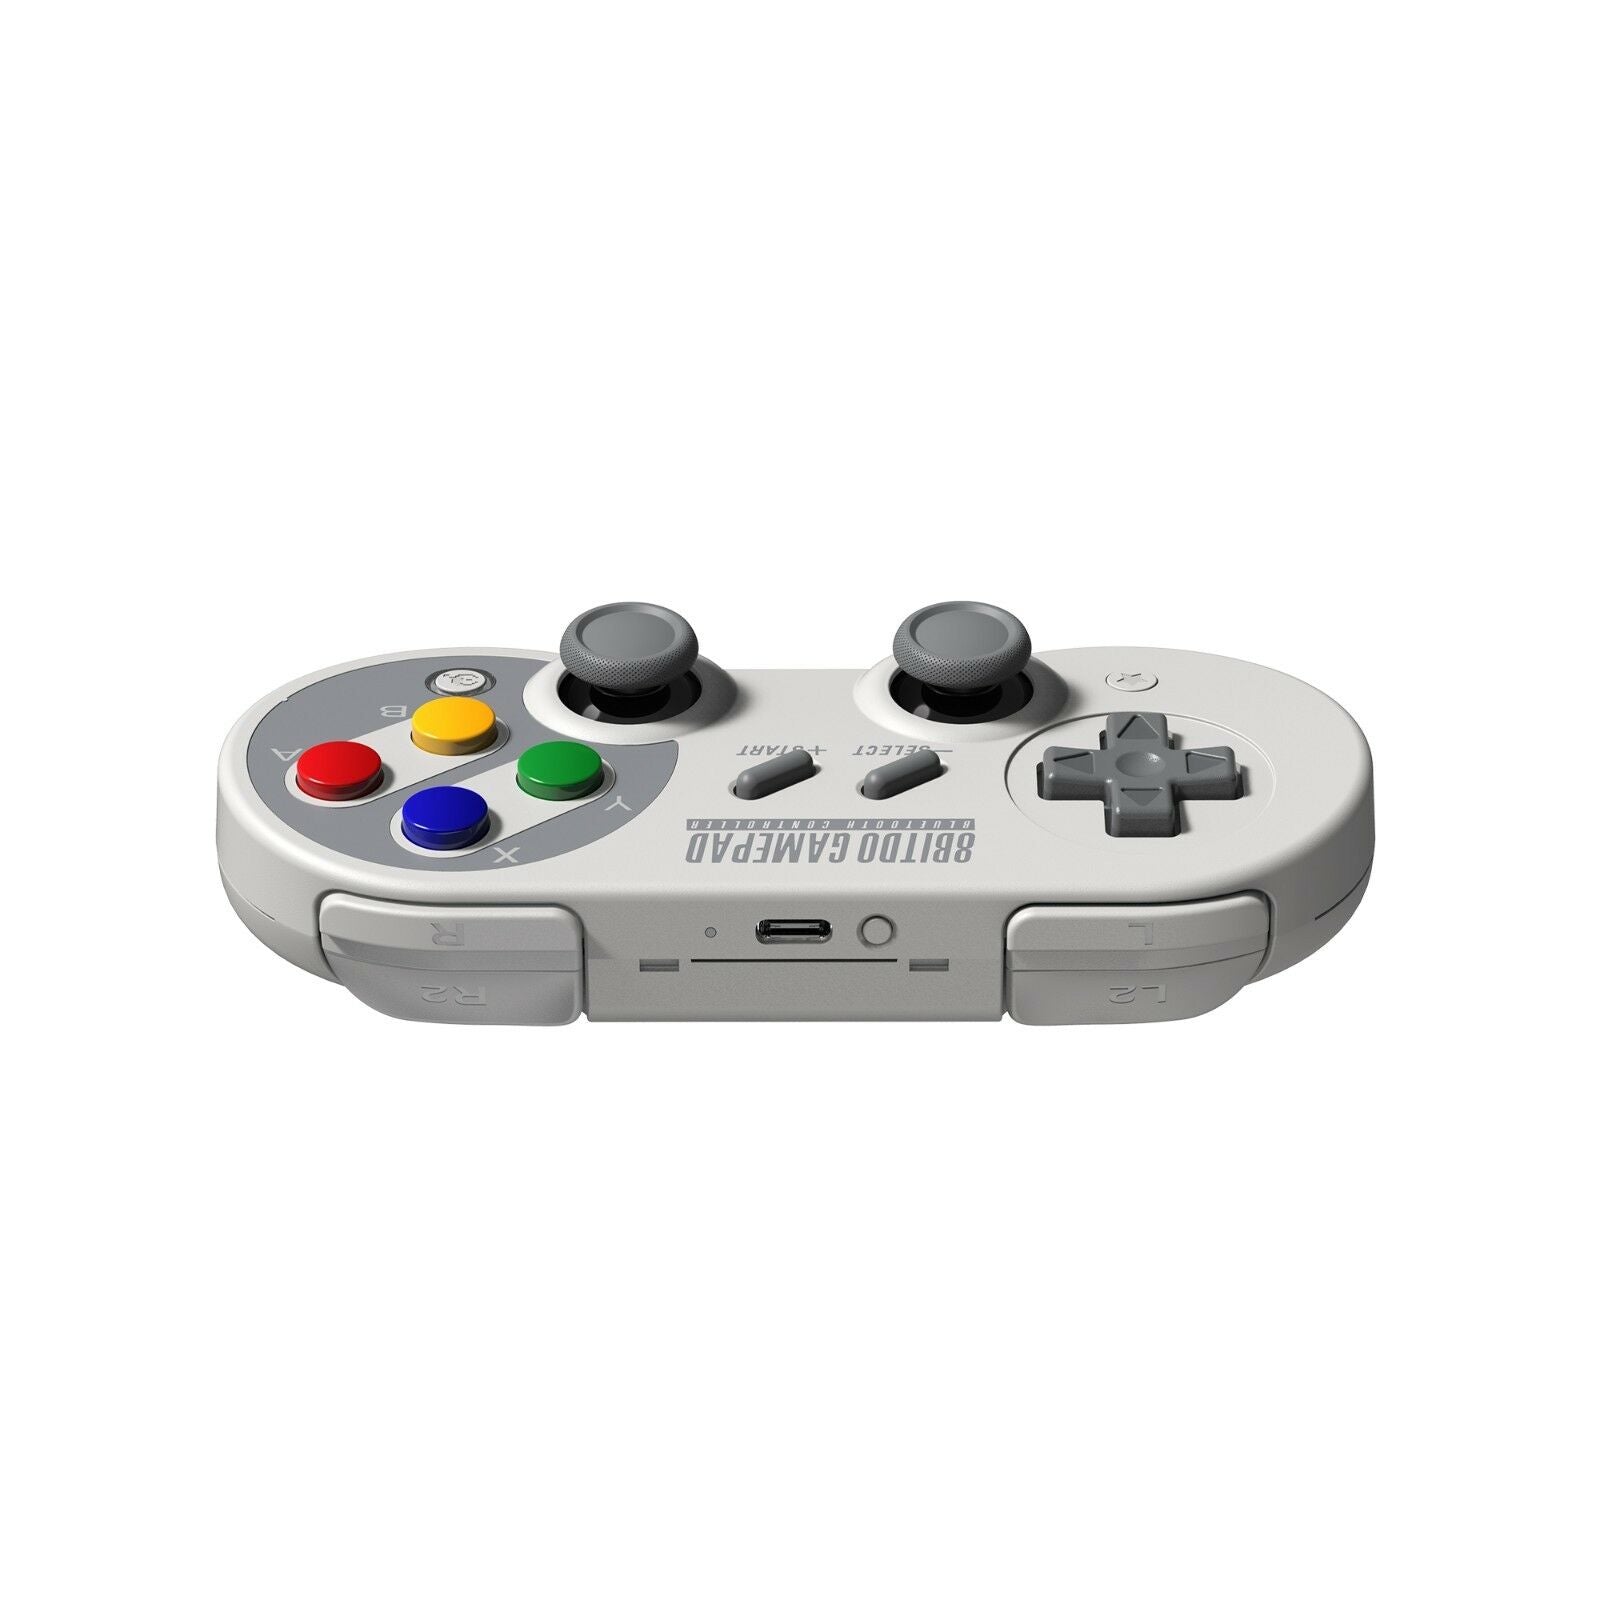 NEW!8Bitdo SF30 Pro Gamepad Controller for Nintendo Switch Windows macOS Android